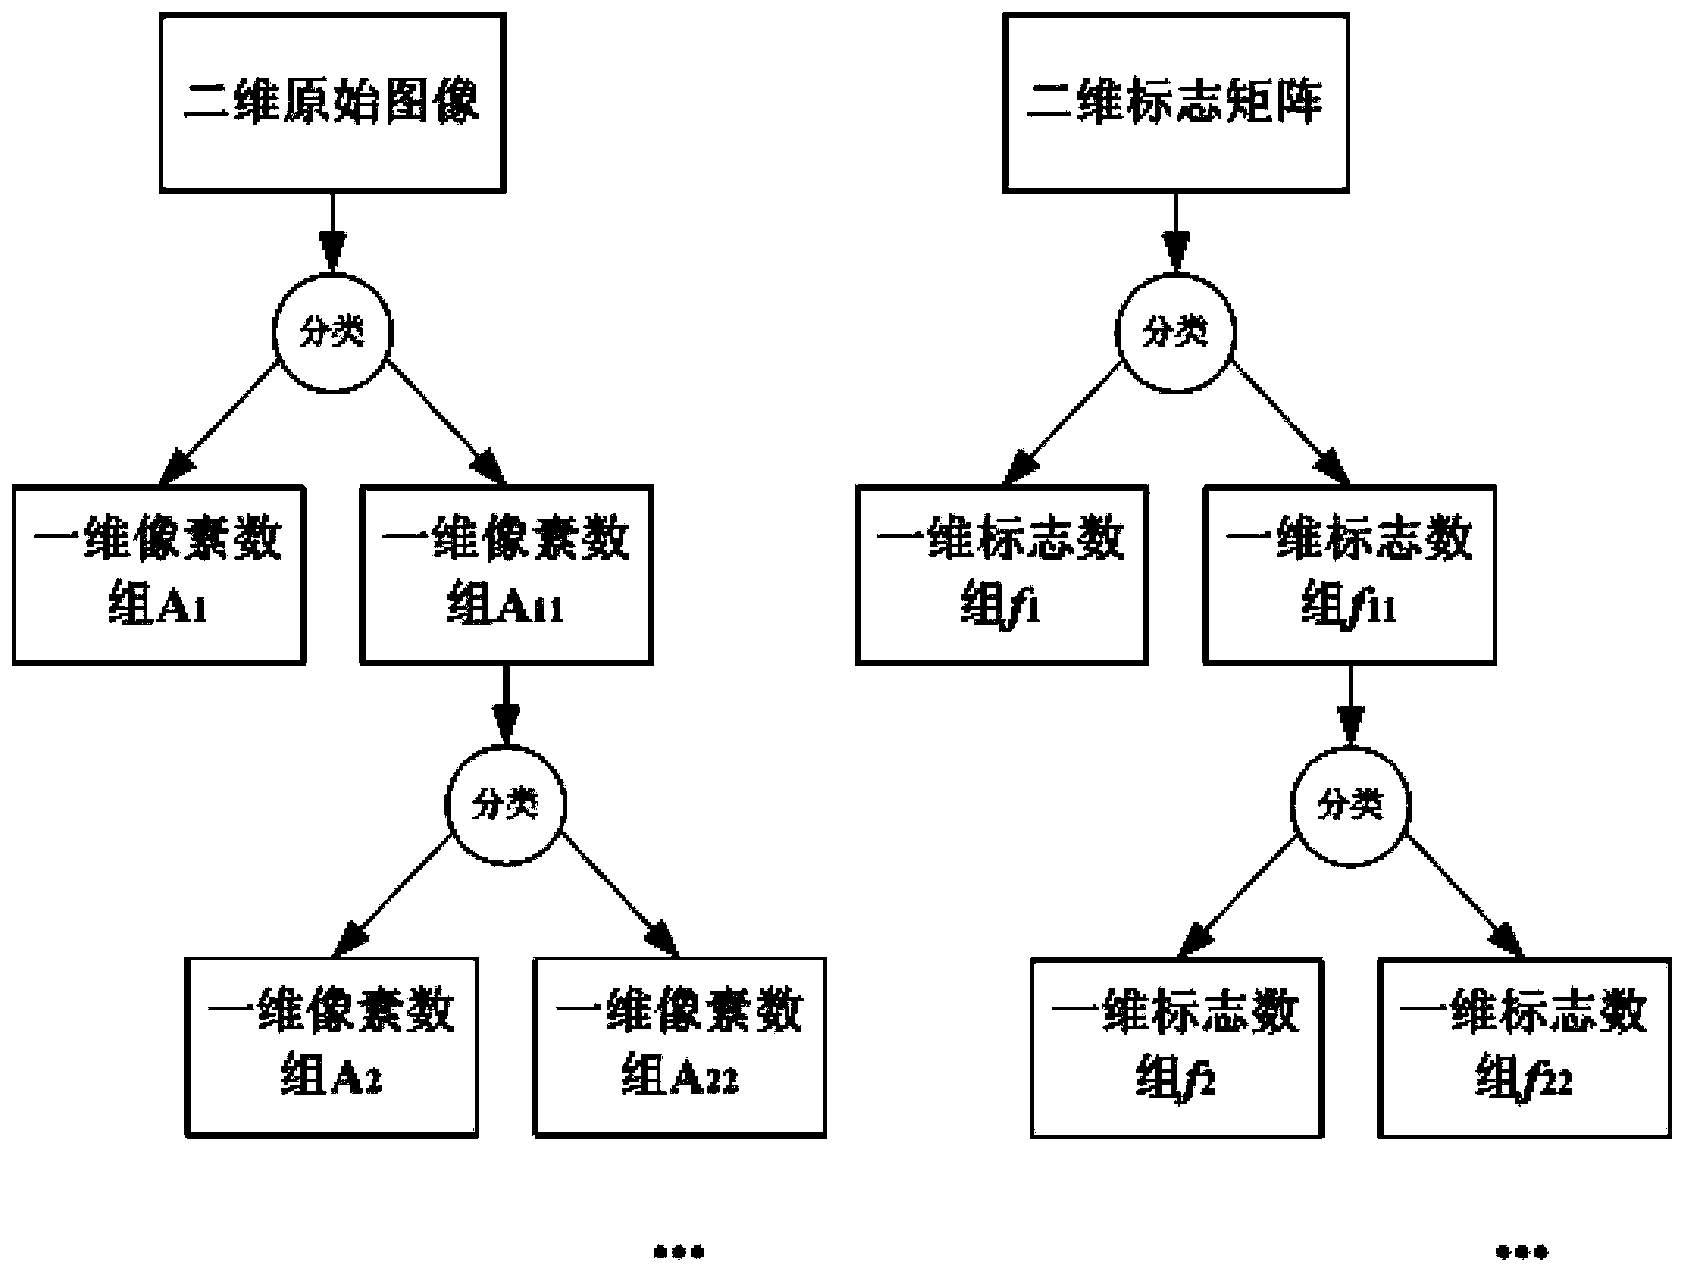 Method for compressing and uncompressing image based on color classification and cluster